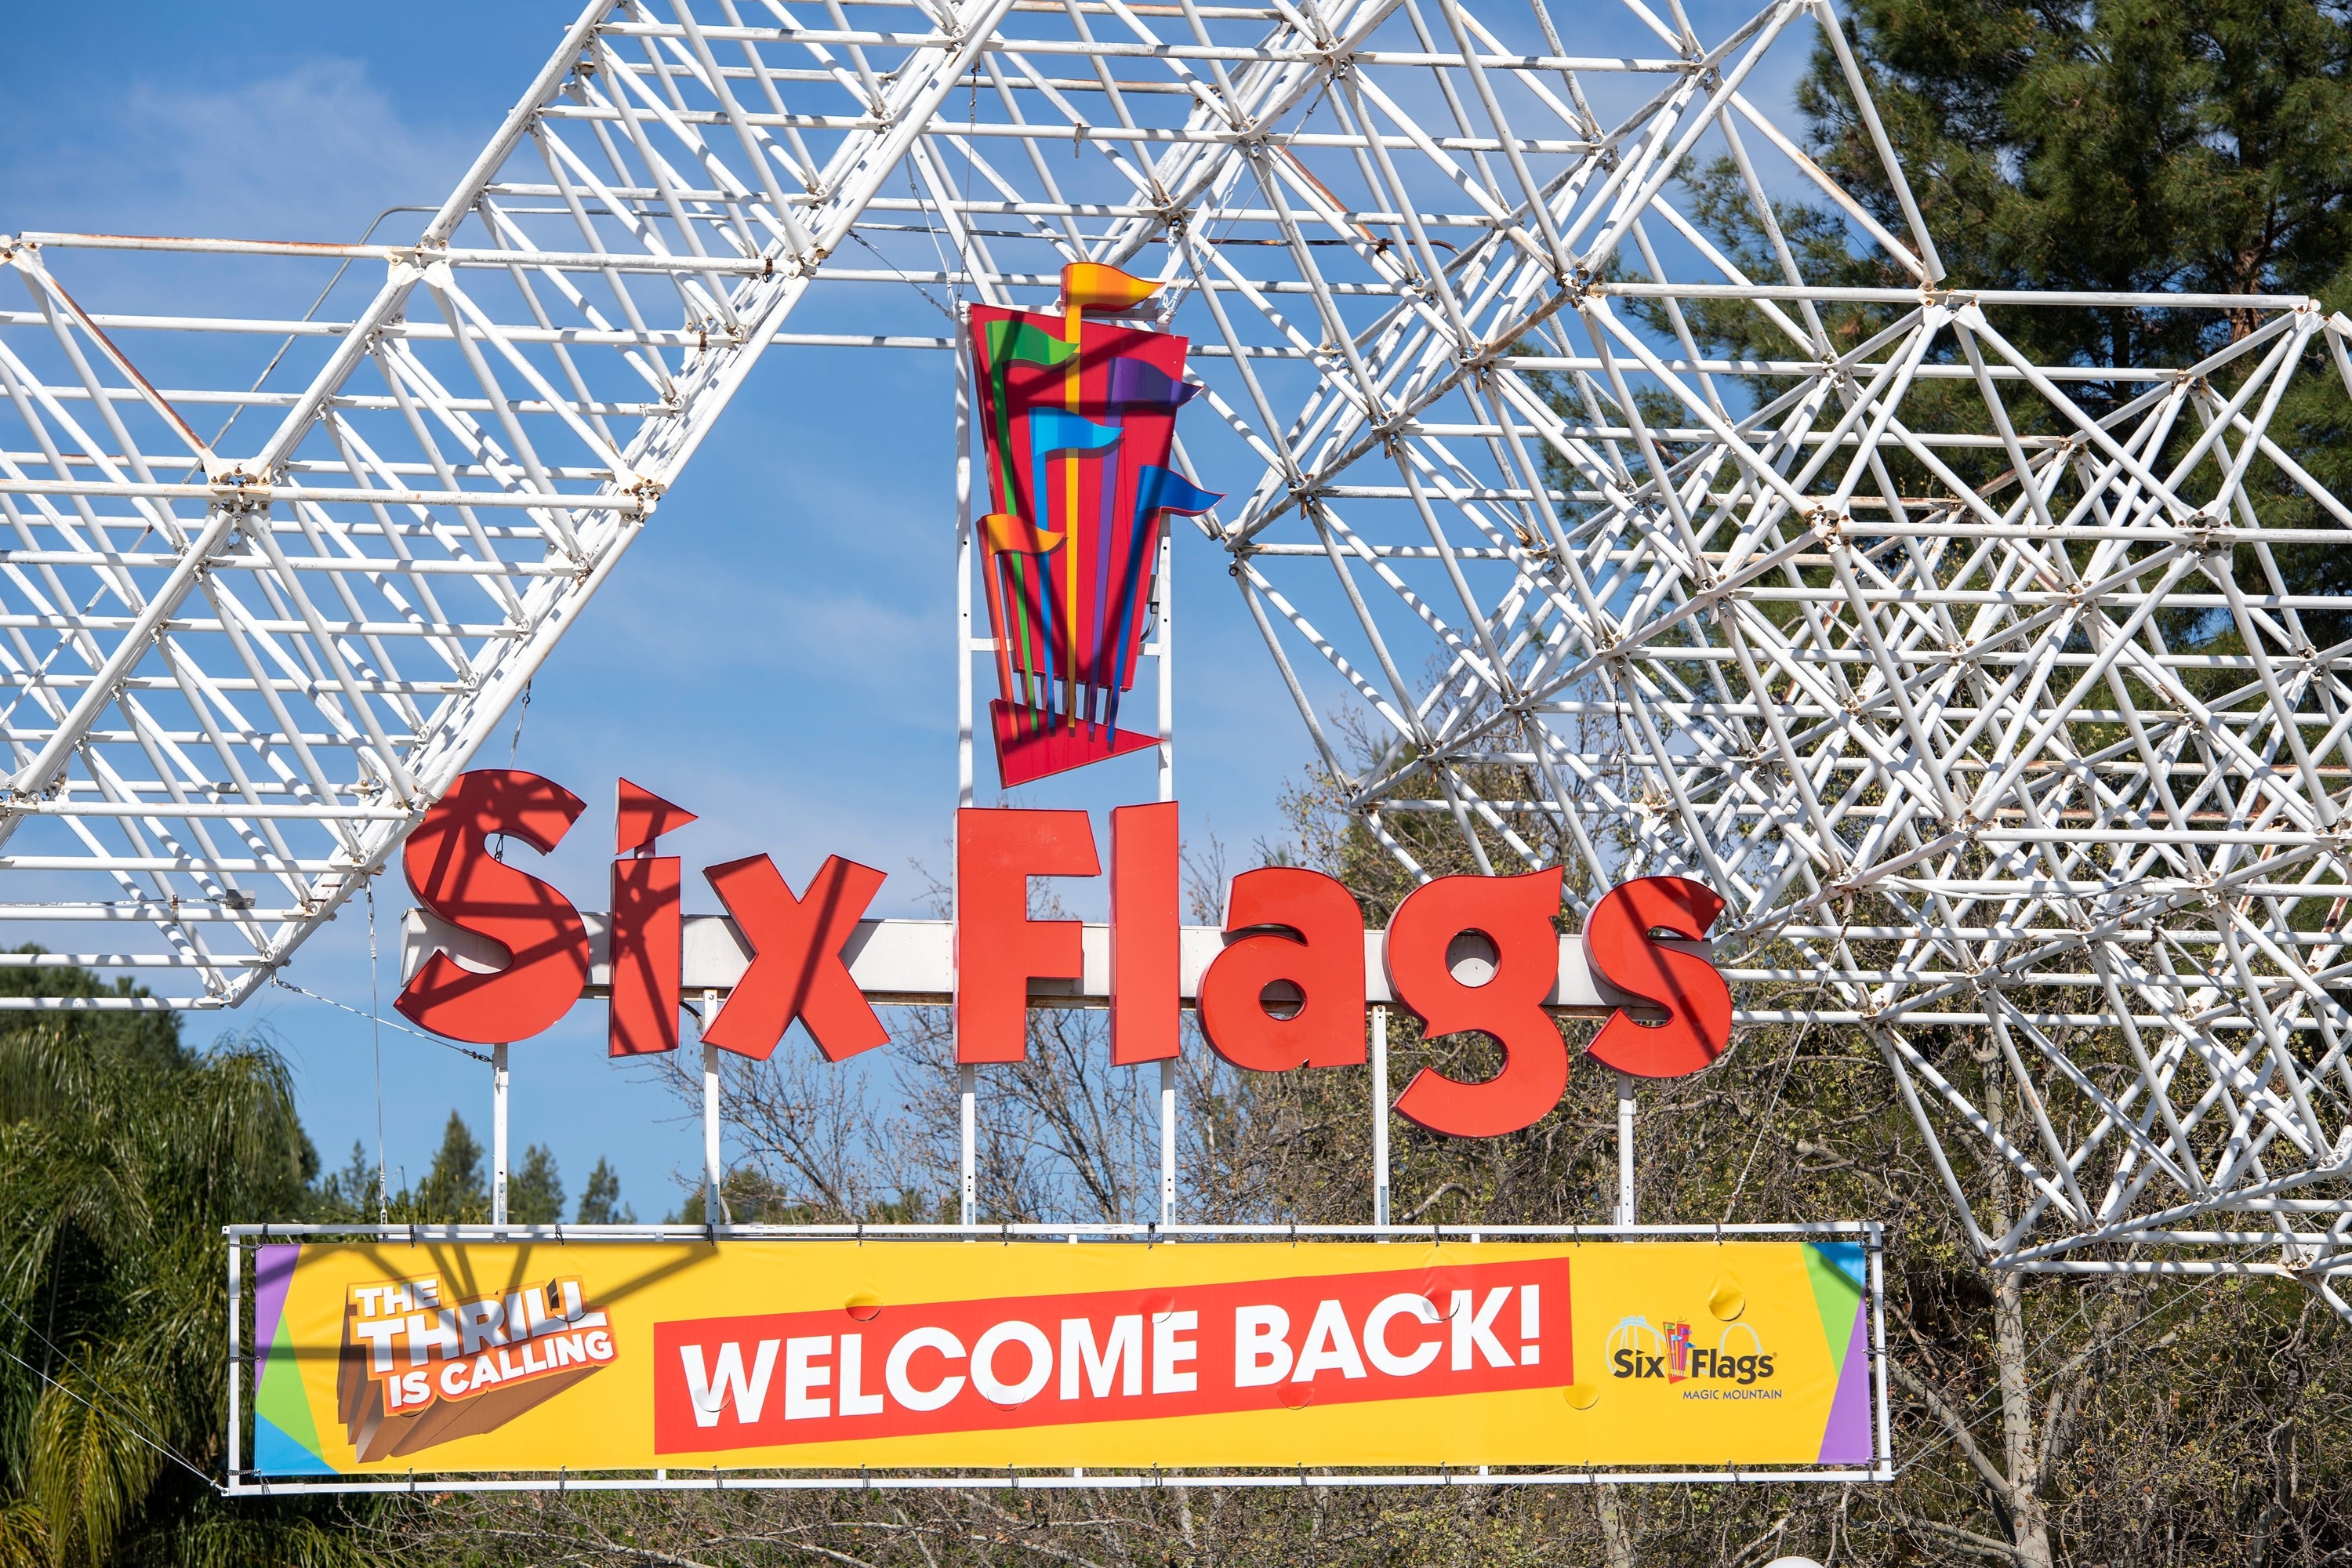 The Six Flags logo